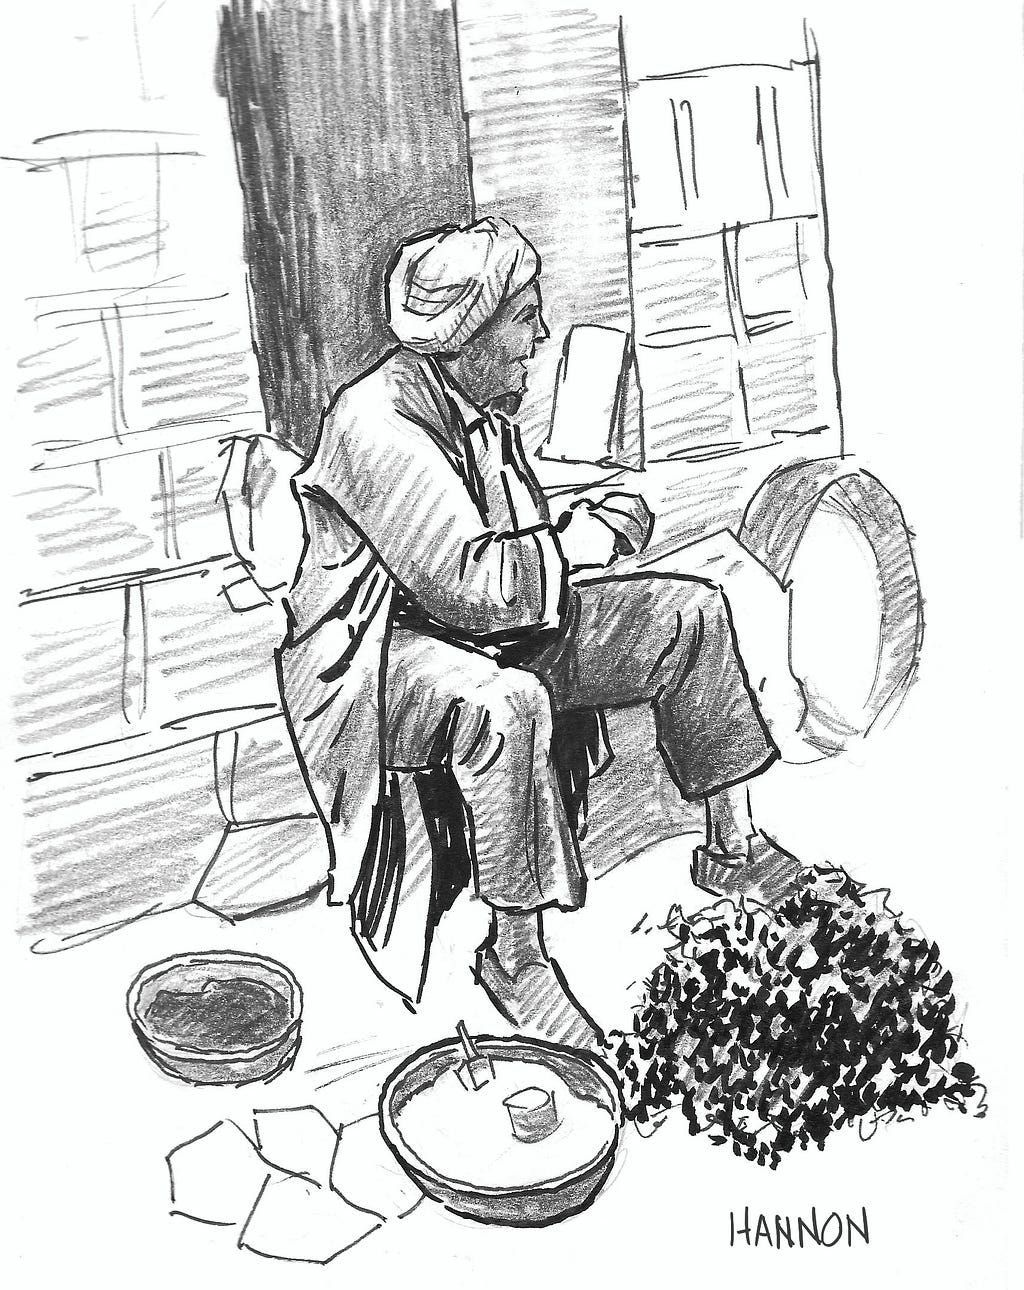 A merchant in an open-air market is selling spices in bowls and fresh mint in a pile, both placed on the ground near his feet. He is wearing a turban and a long coat. He sits on a stone ledge attached to a stone block building behind him. Behind his head and shoulders is a rectangular opening in the building revealing the inside. No details can be seen inside the building.